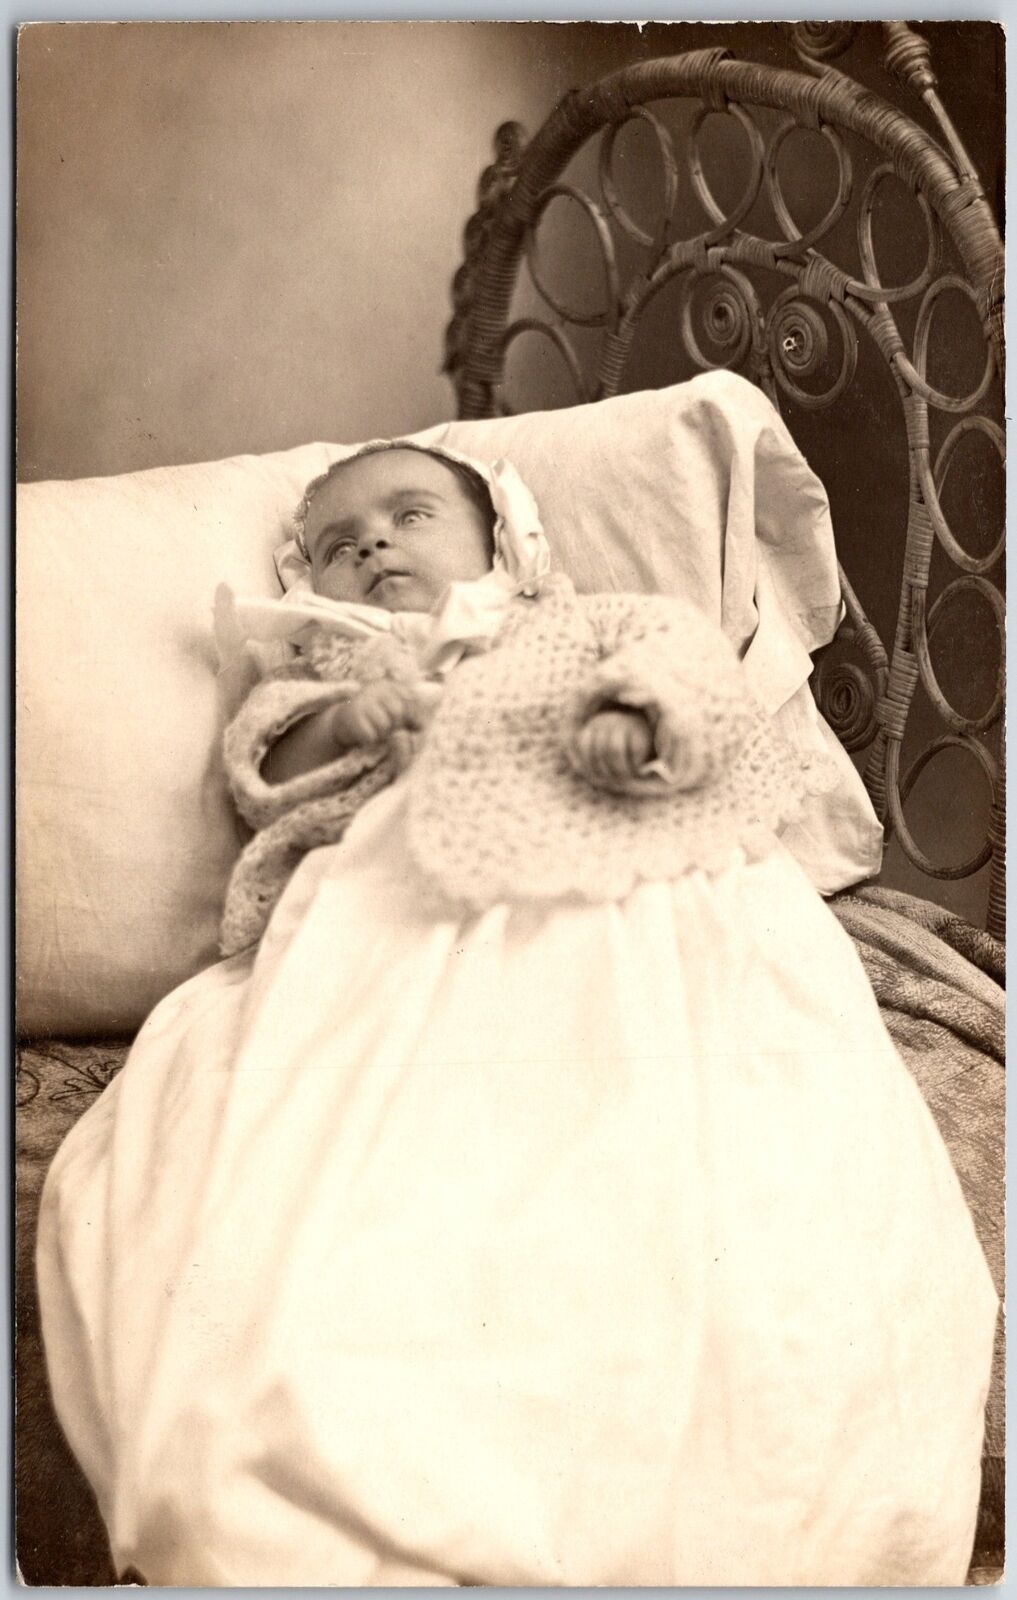 Infant Baby Child Photograph White Dress Lying on Chair Christening Postcard